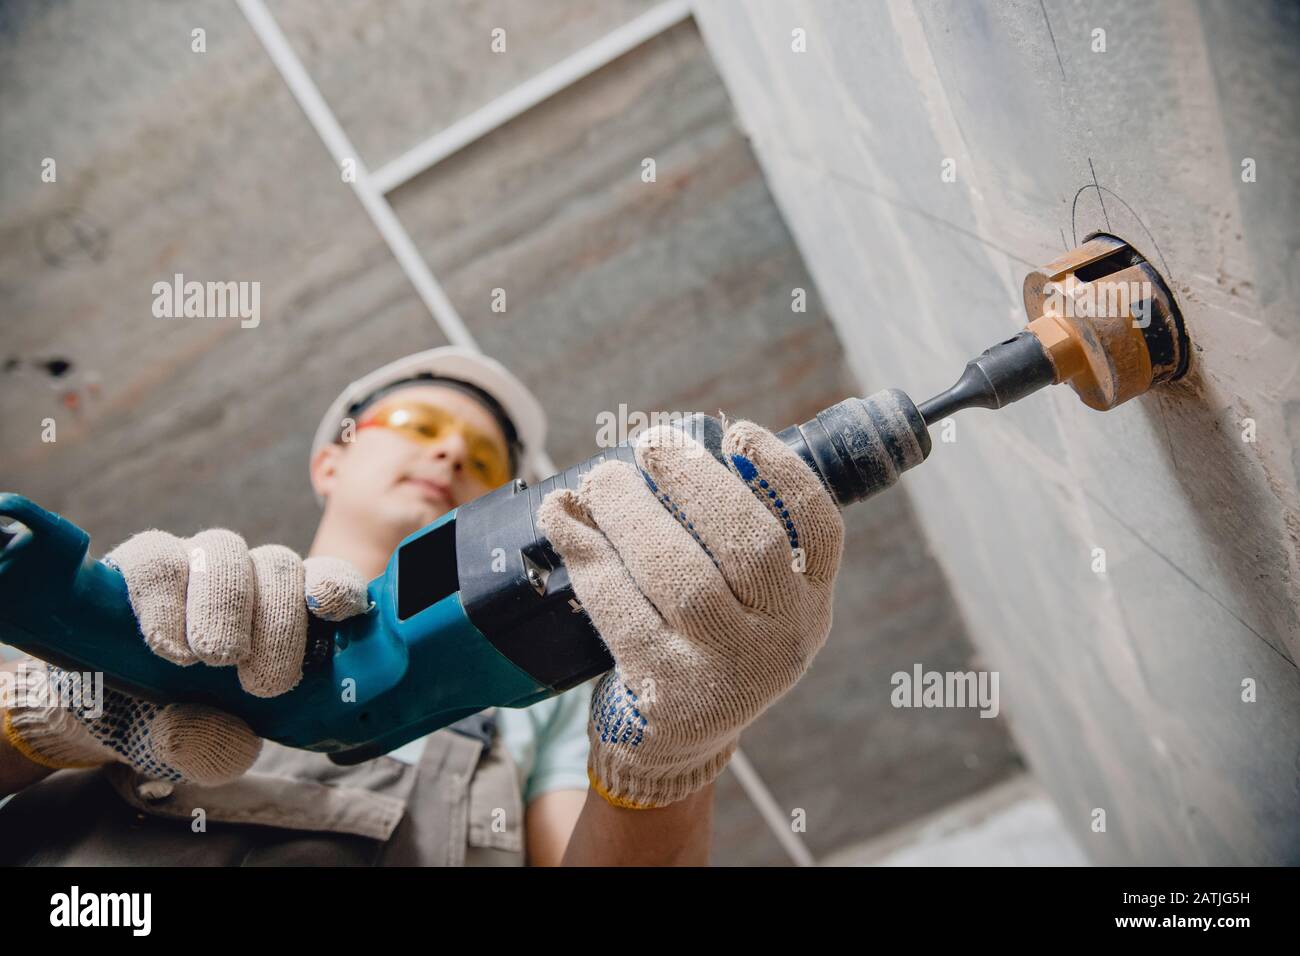 Builder worker pneumatic hammer drills hole in concrete brick wall with diamond crown for electric cable, socket, switch Stock Photo